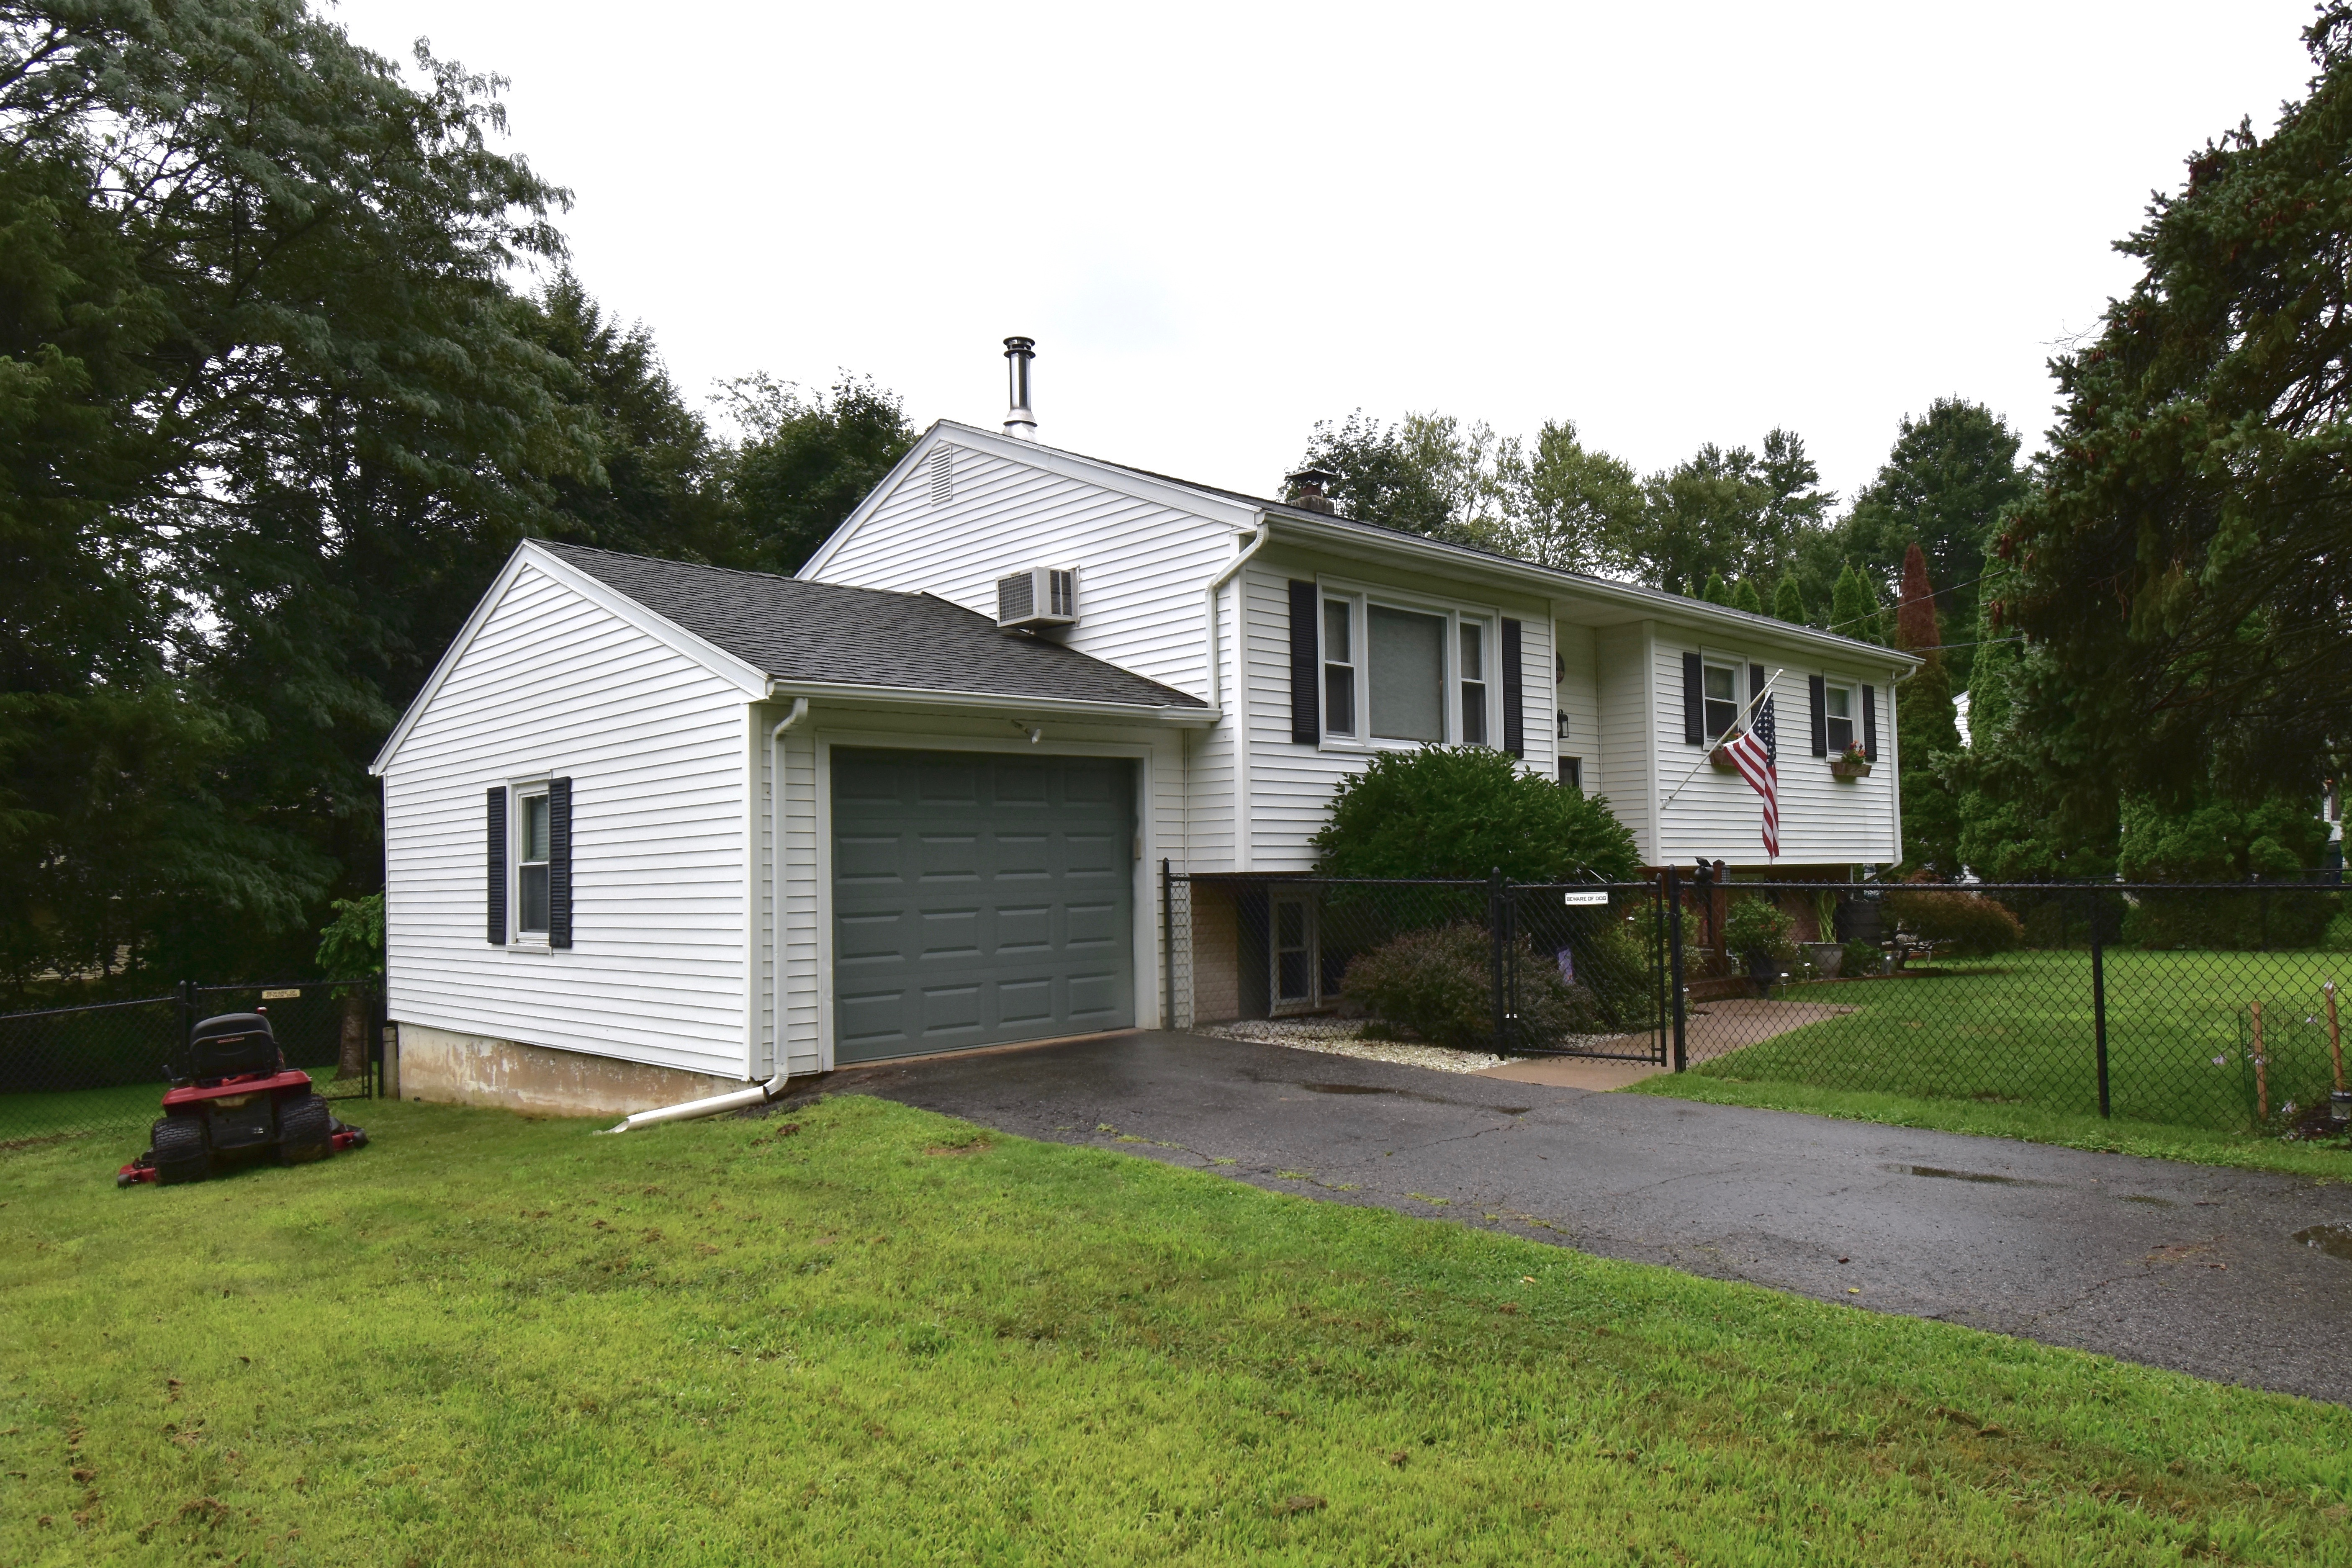 Home for sale in Brookfield CT 06804